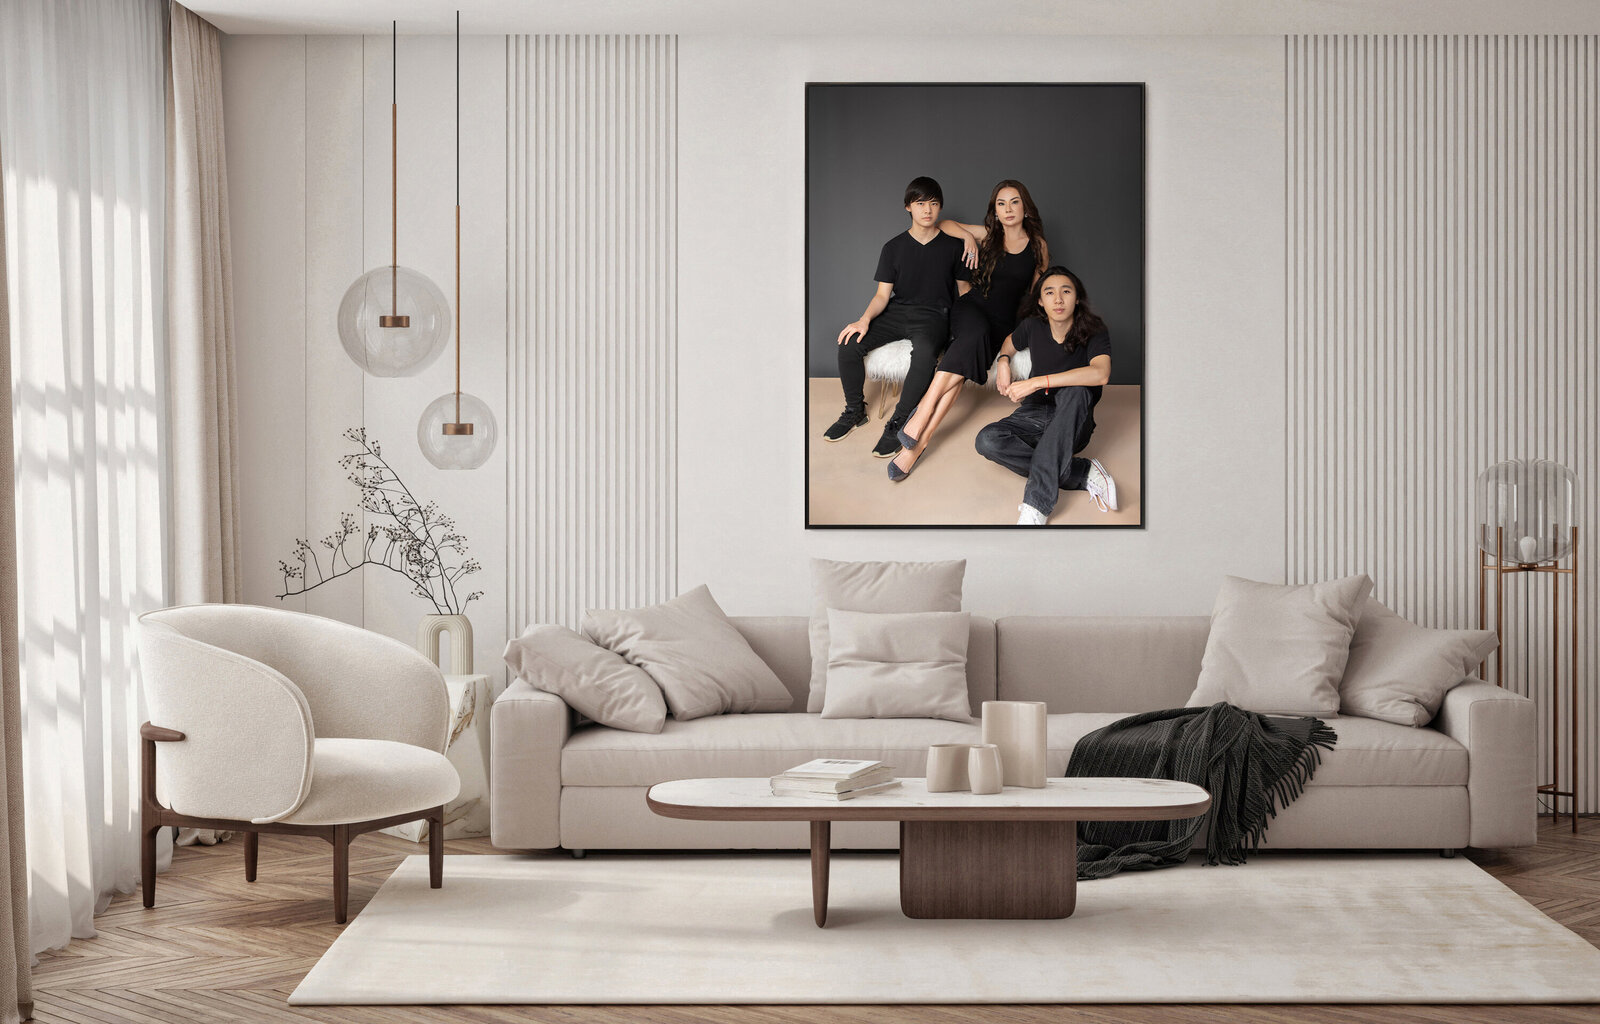 A clean and elegant looking transitional home. A big framed portrait of a family. A mother with two sons in sitting positions. Looking beautiful and elegant. Portrait is hung on the walls of their family room.